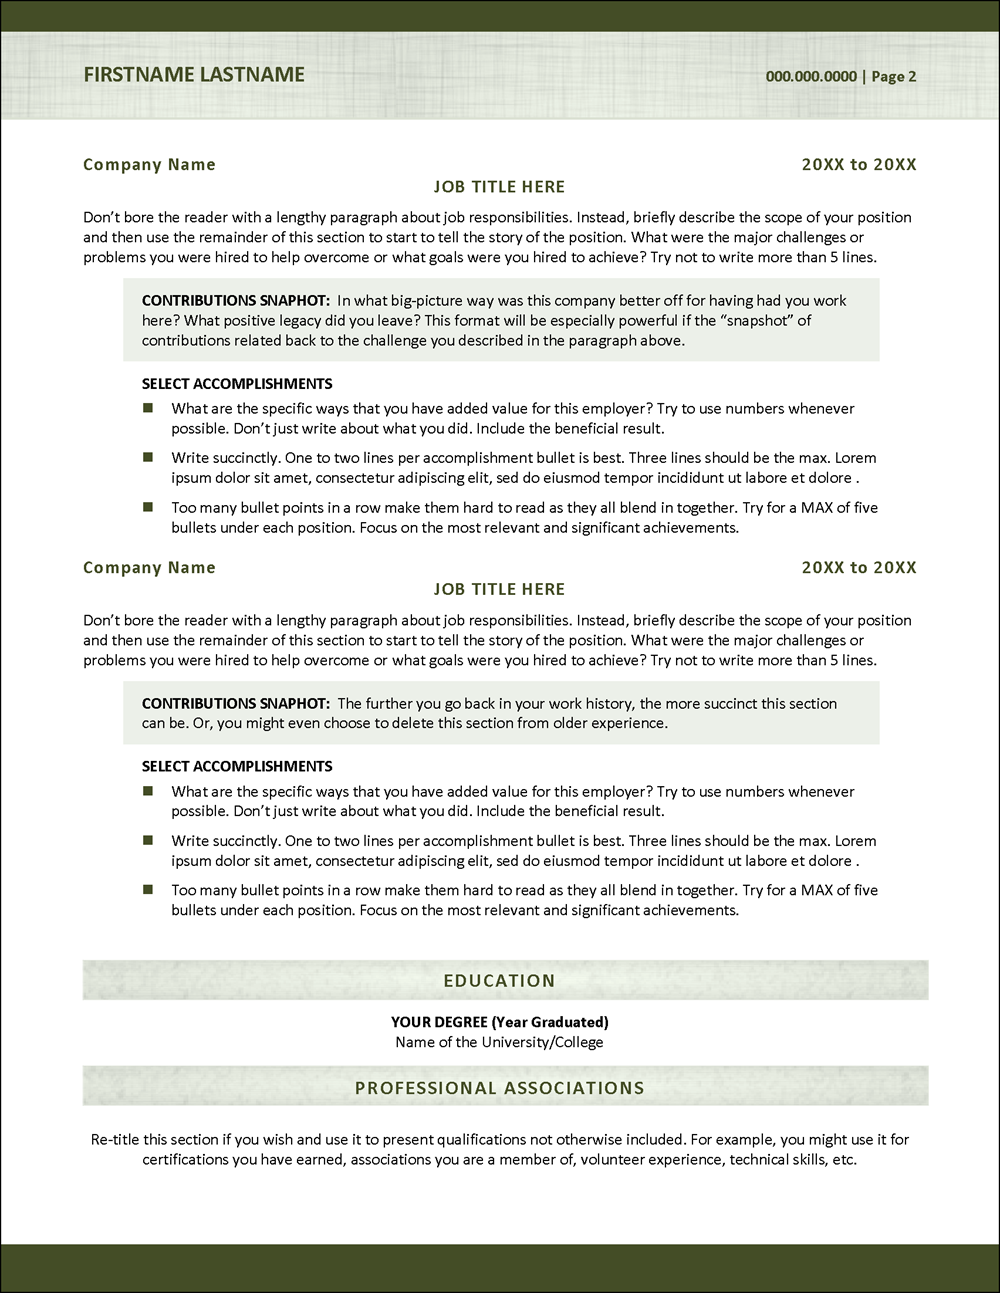 Resume Template for A Professional Job Page 2